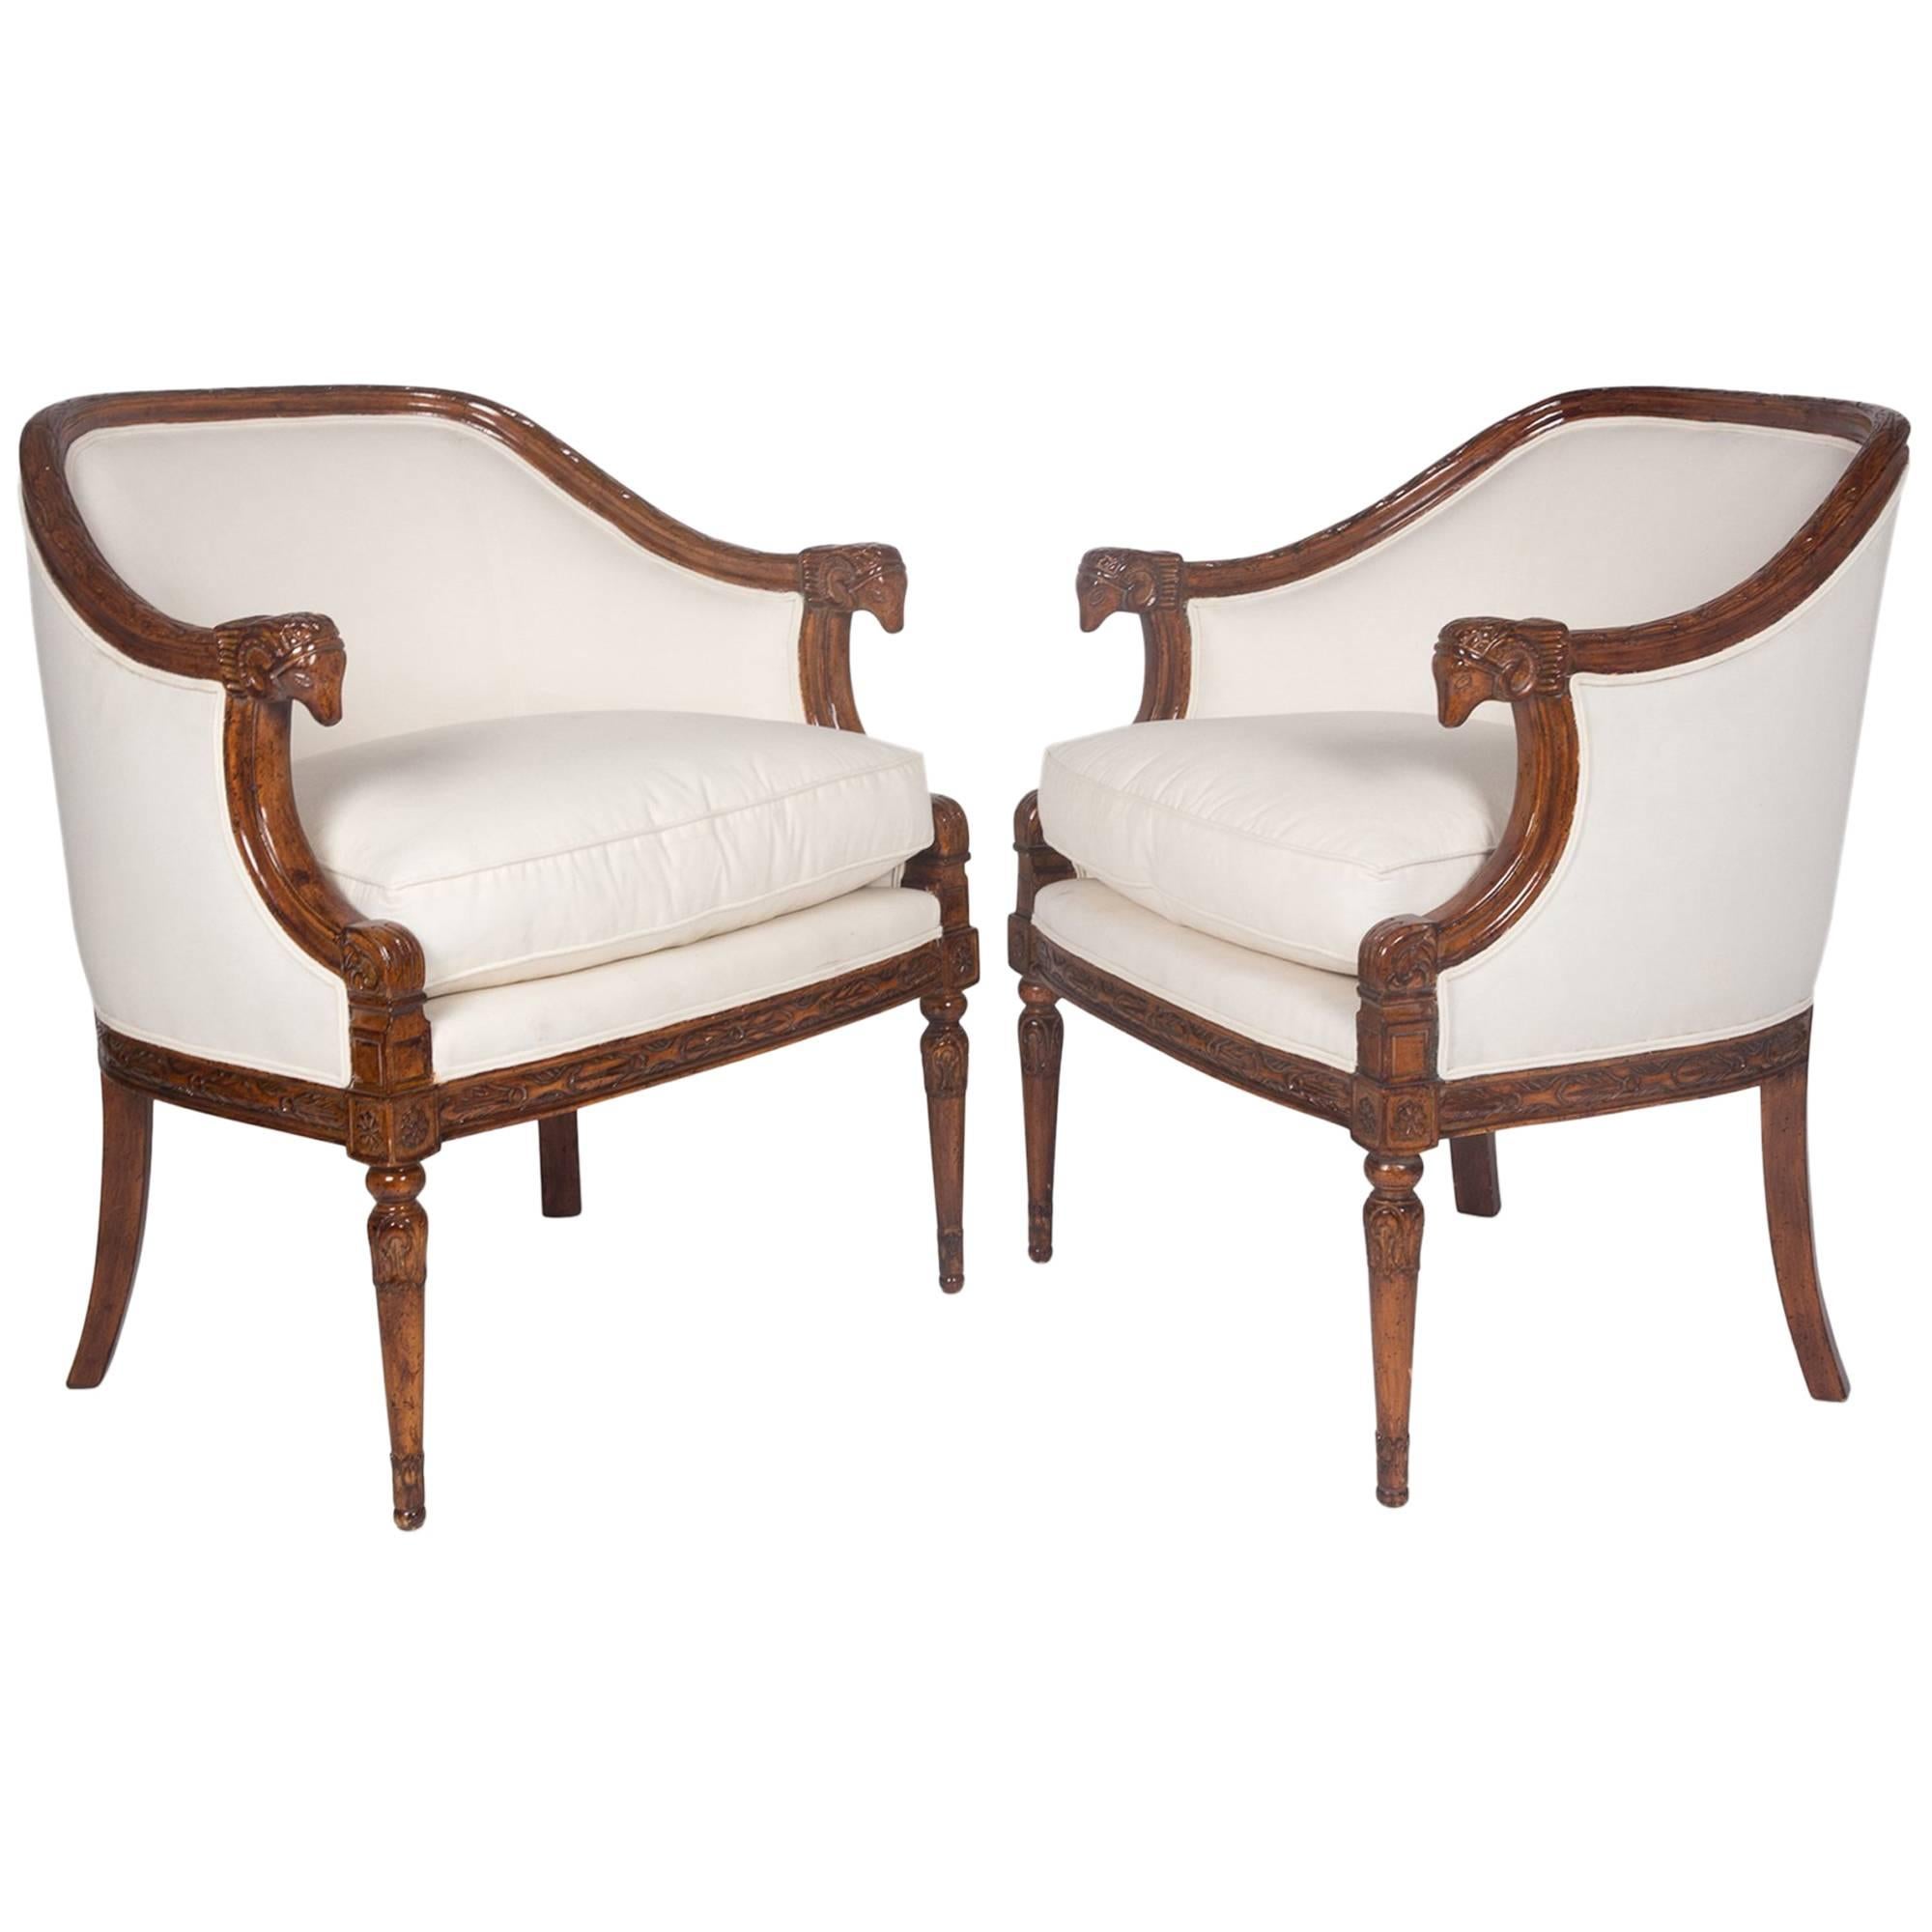 Pair of Carved Mahogany Armchairs, German, 1930s For Sale